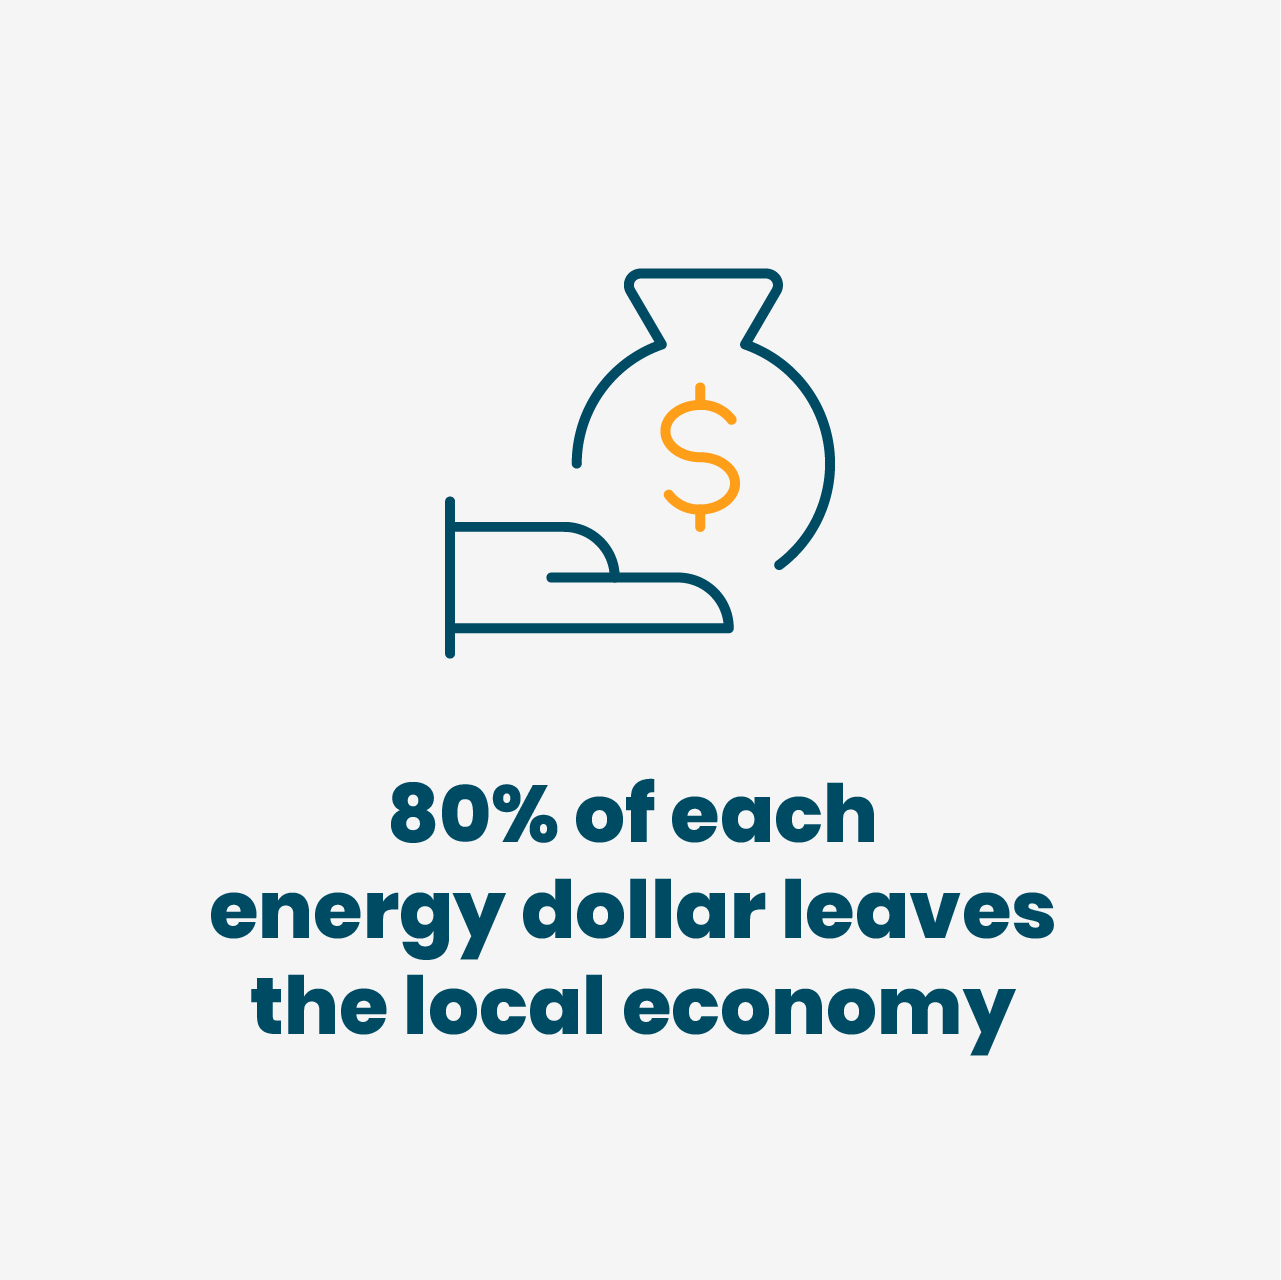 80% of each energy dollar leaves the local economy